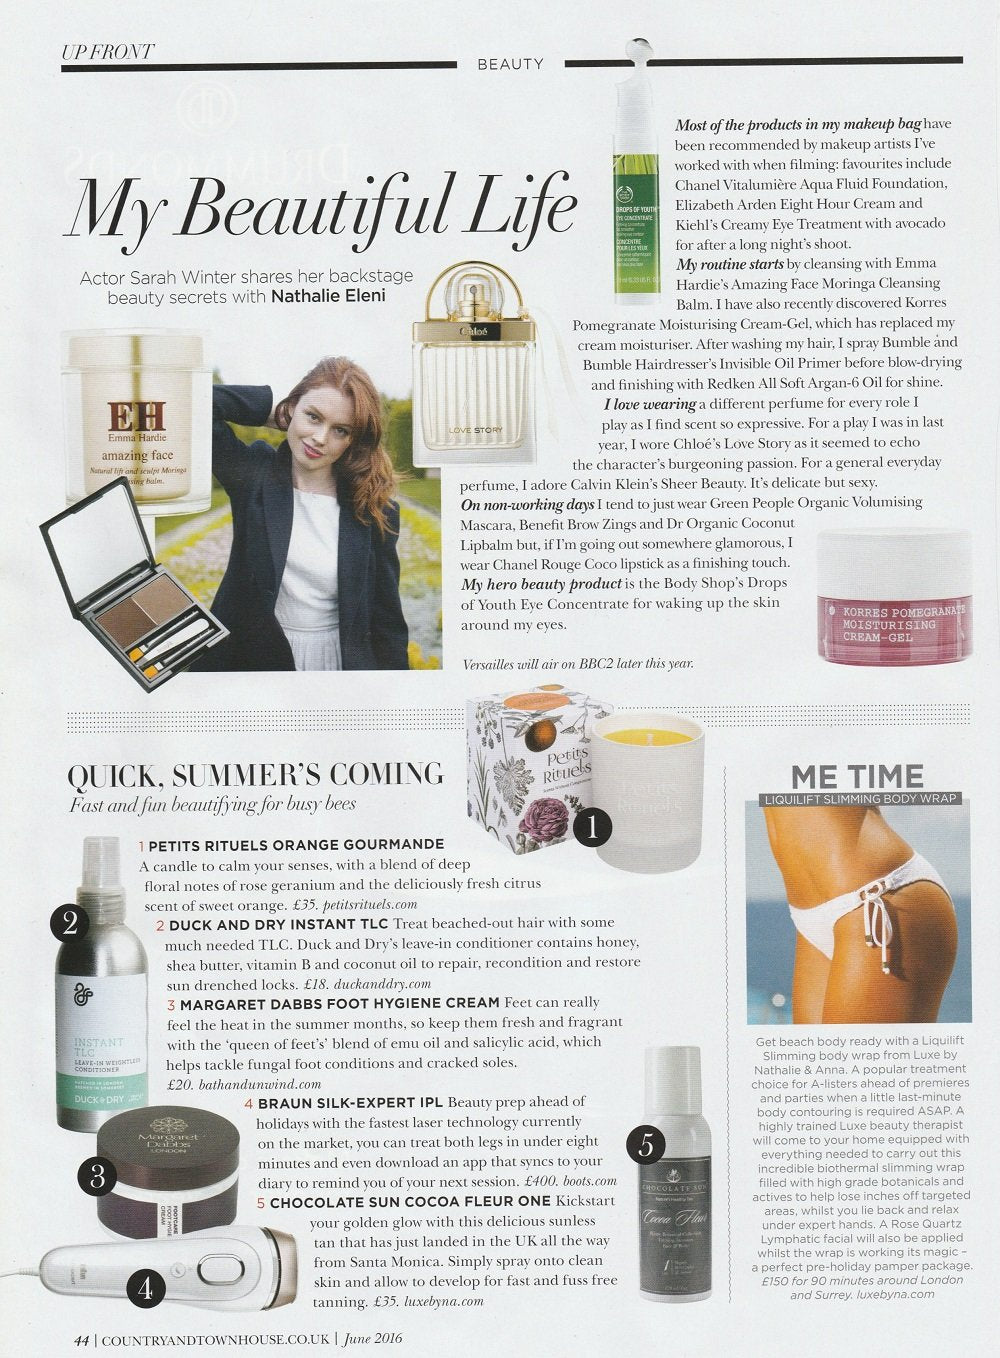 Town & Country house feature of the Orange Gourmande candle.